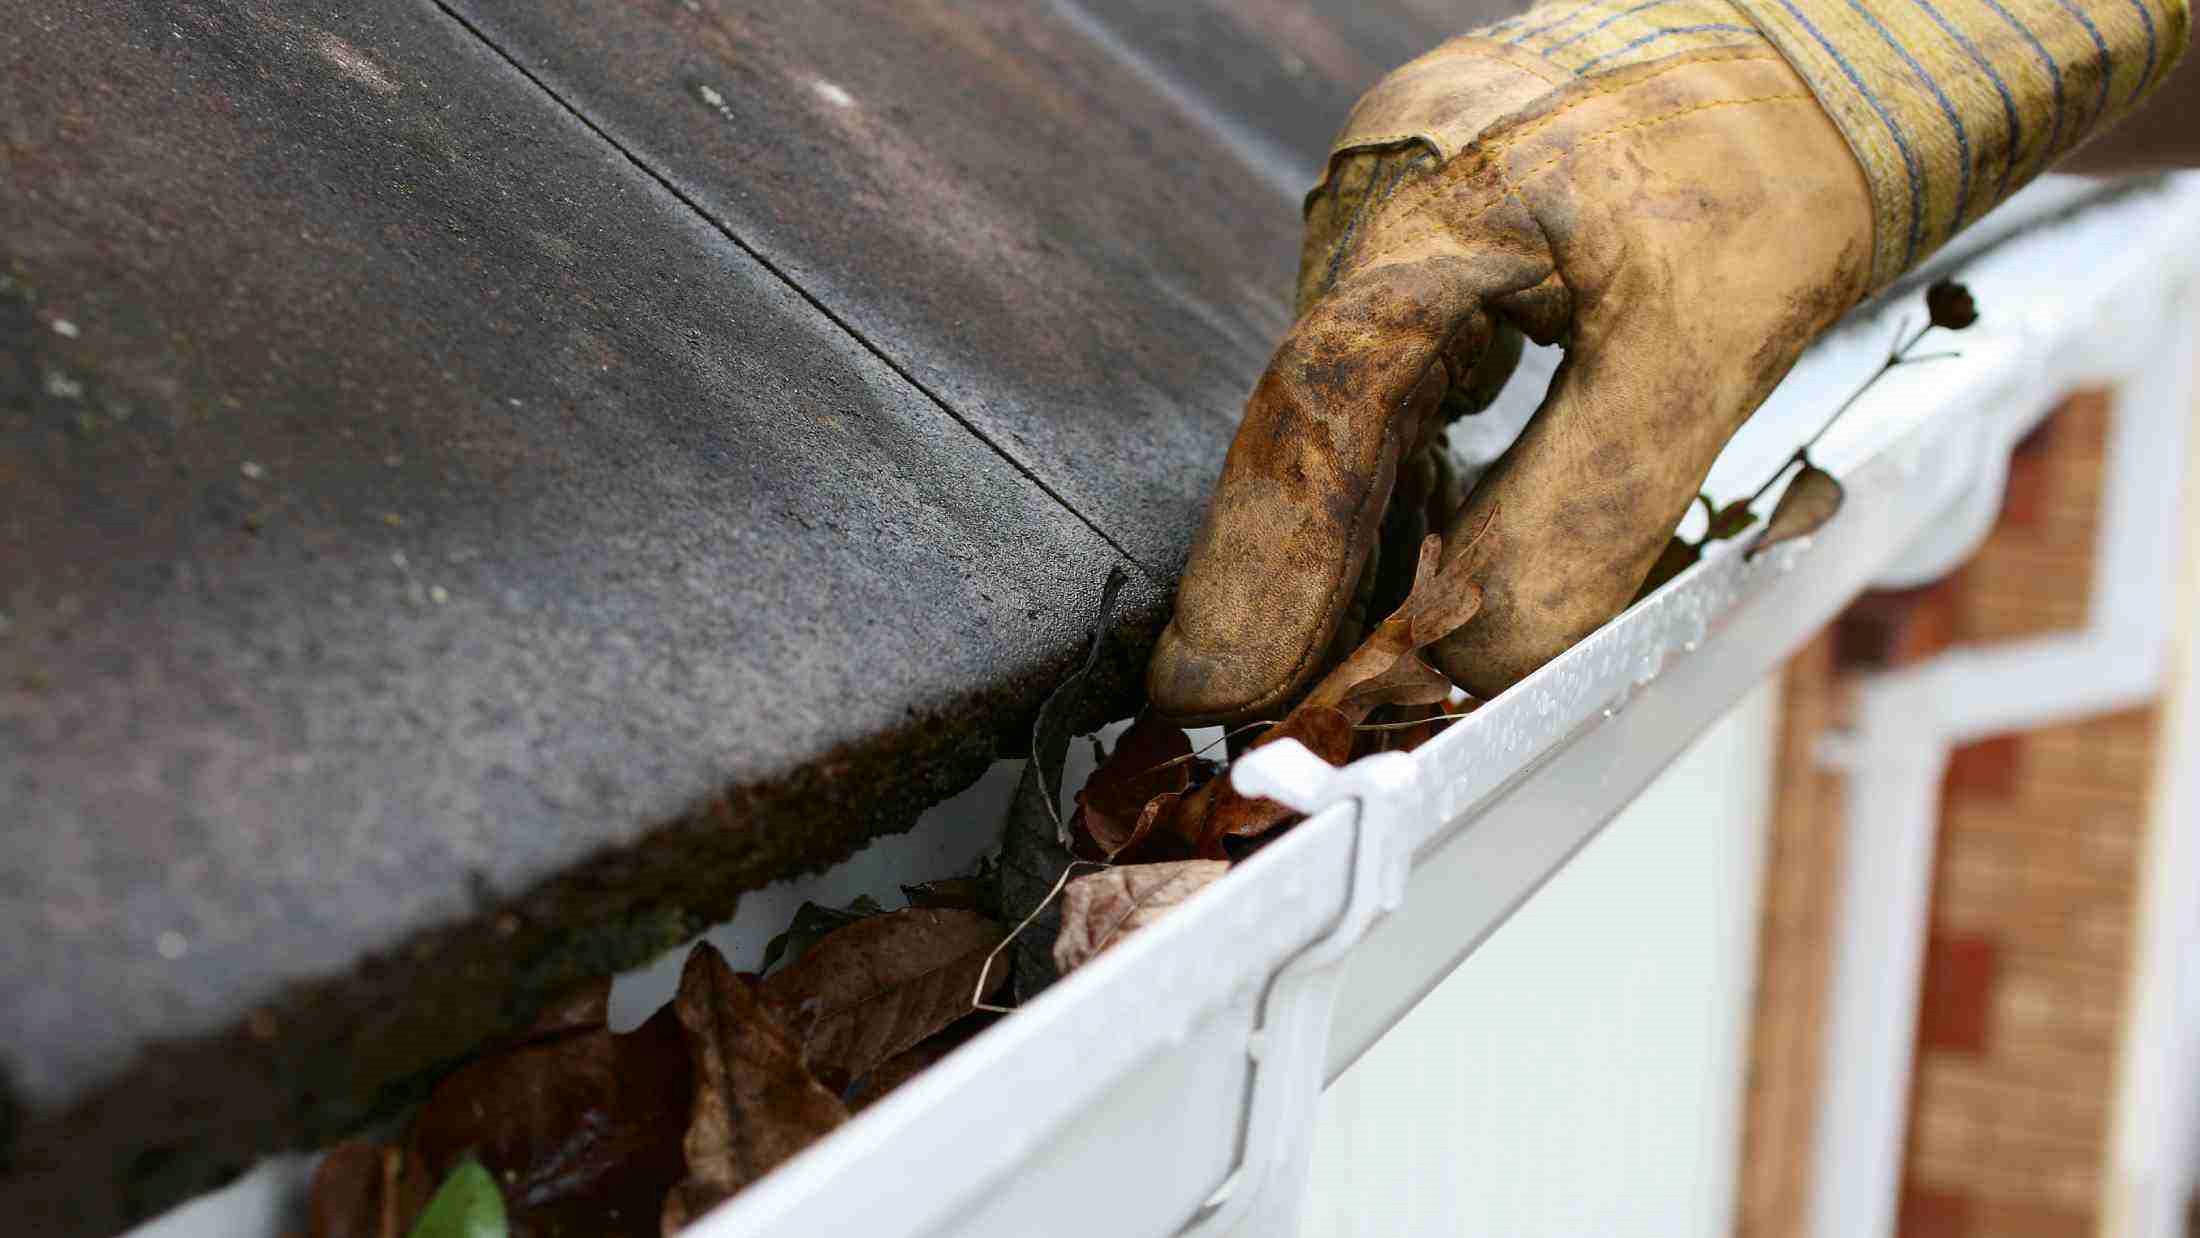 Glove being used to clear a gutter full of leaves